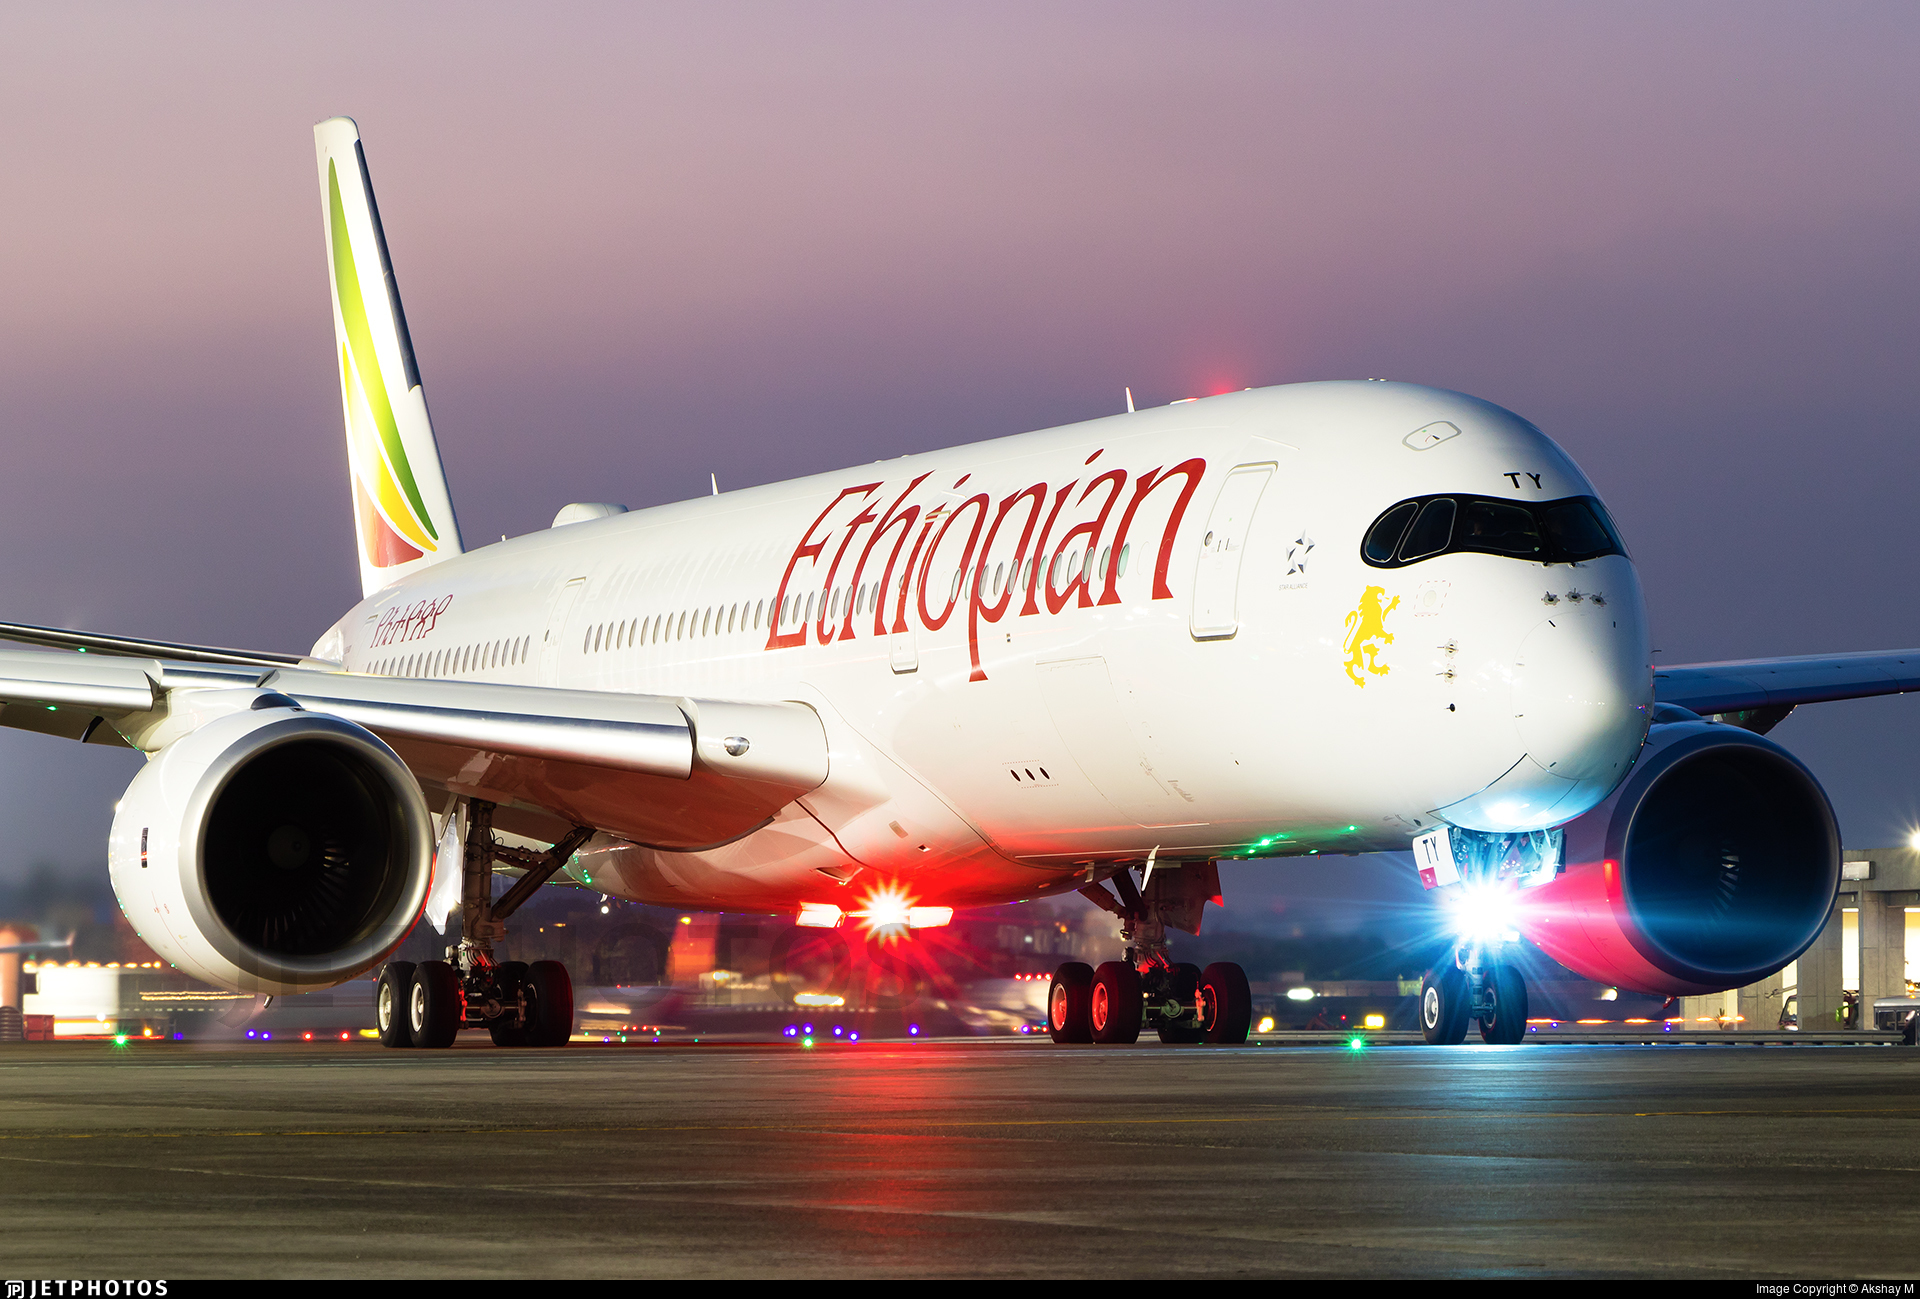 Ethiopian Airlines Concludes Purchase of 49% Stake in New Chadian Airlines